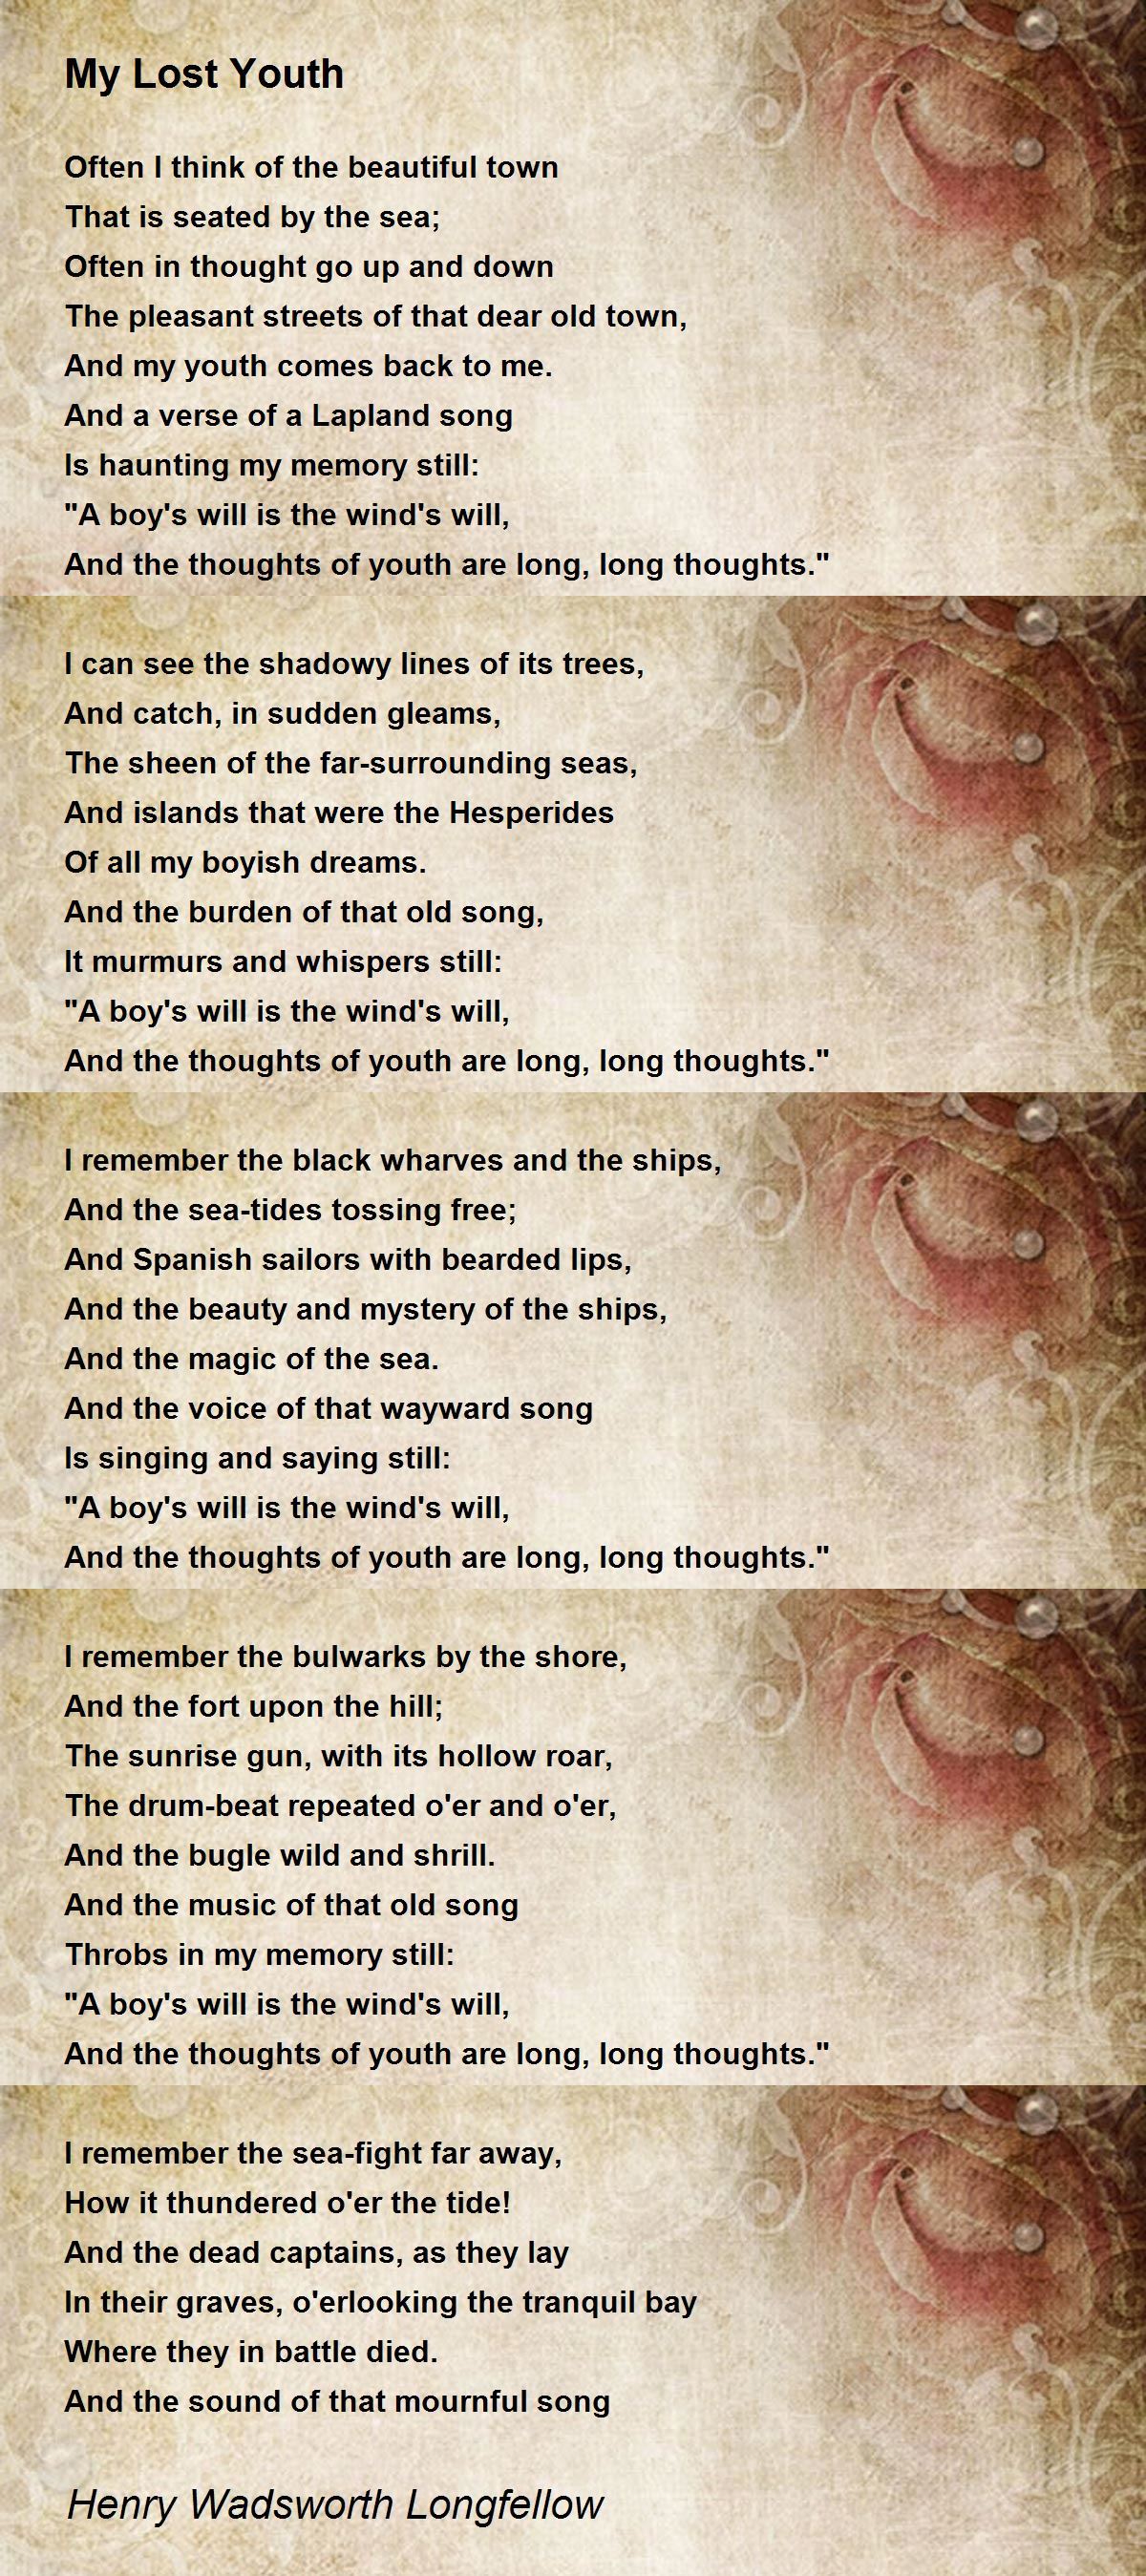 My Lost Youth by Henry Wadsworth Longfellow - My Lost Youth Poem